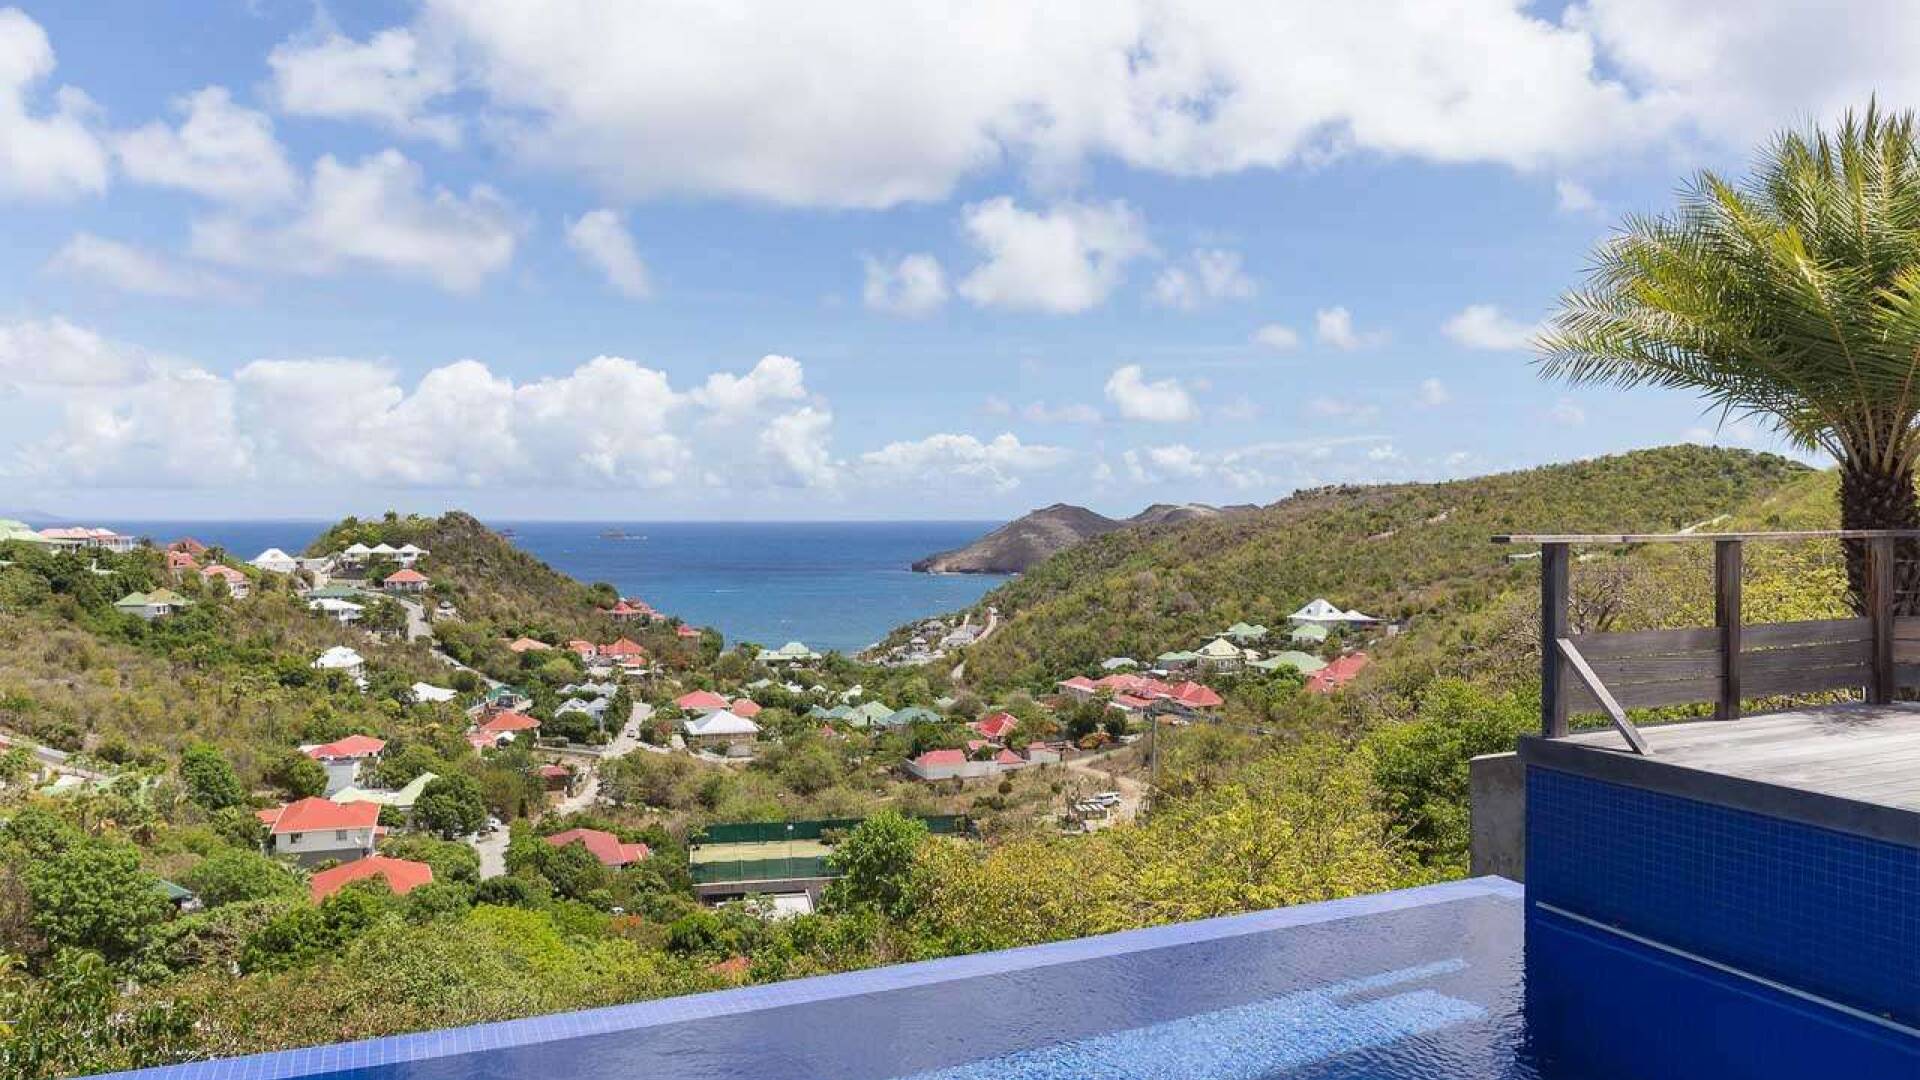 The view from WV RIV, Flamands, St. Barthelemy